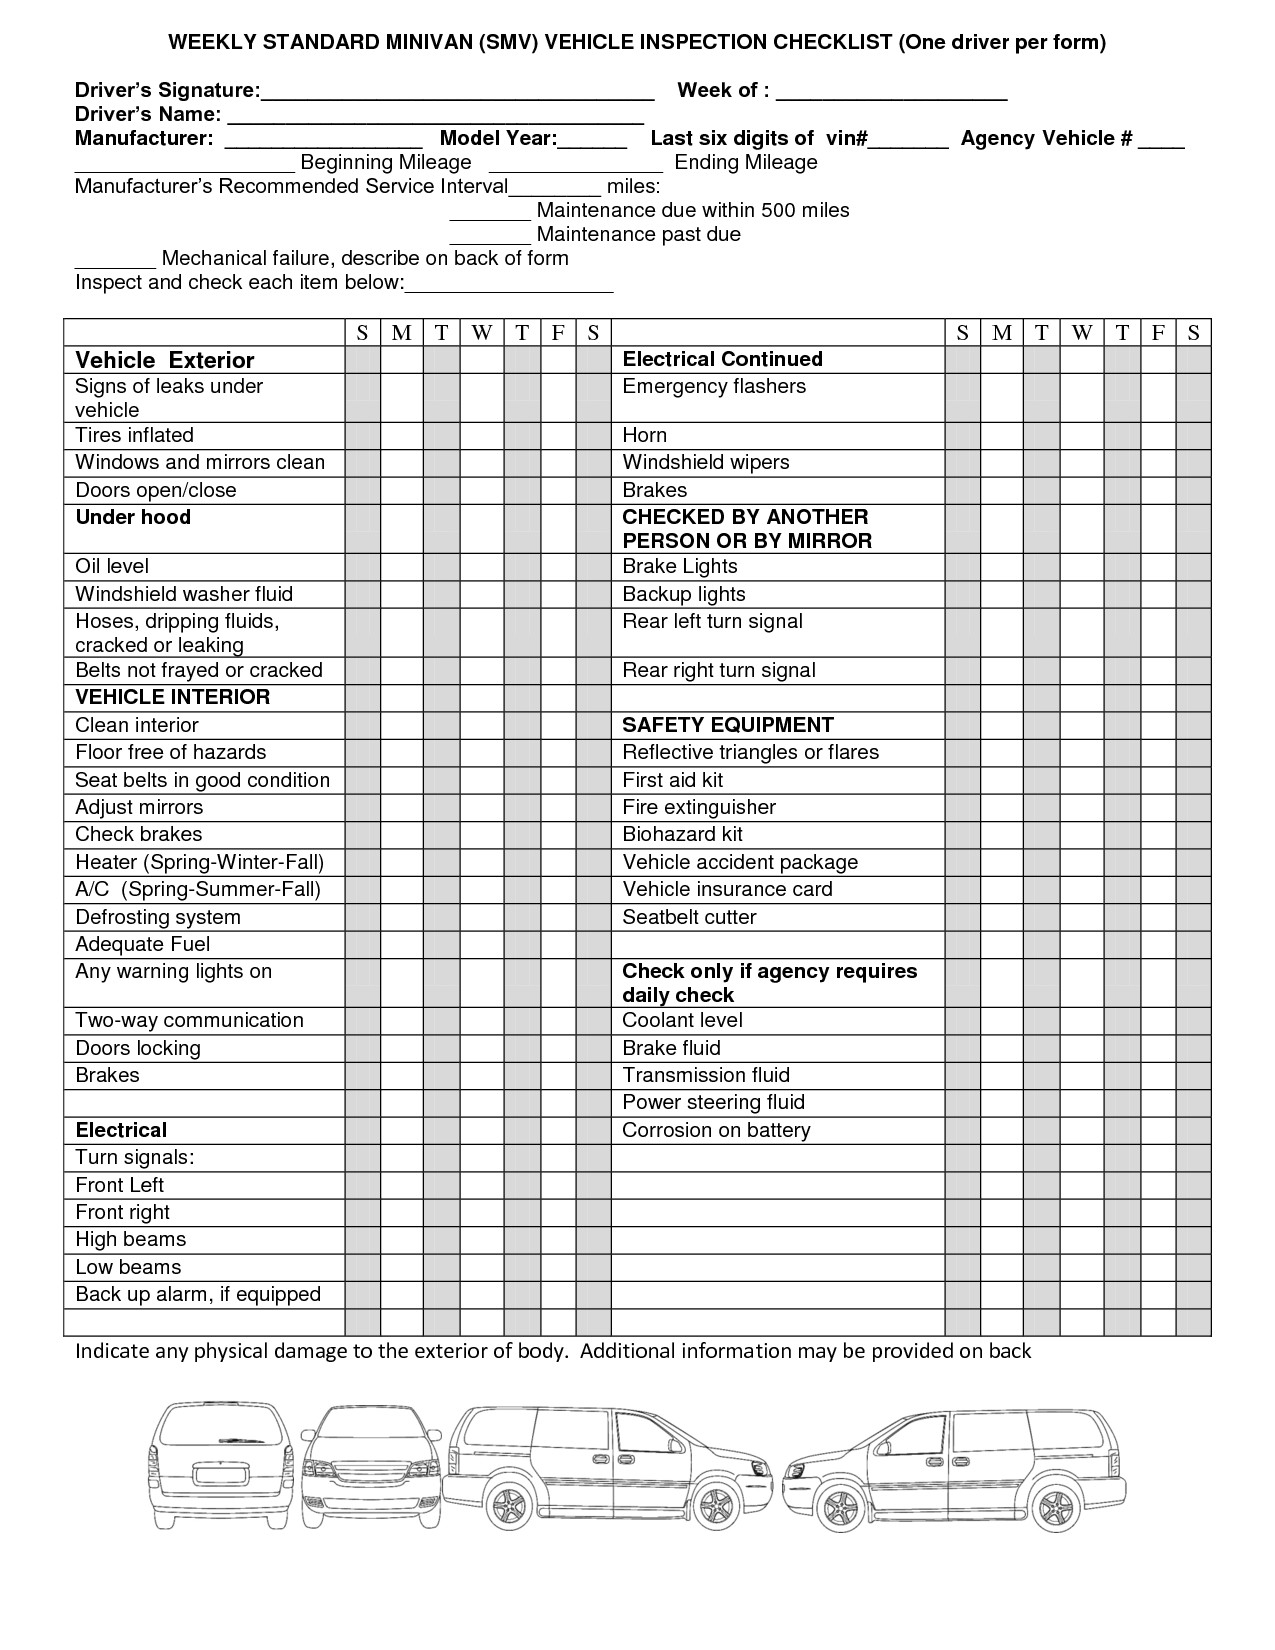 Inspection Log Sheet Weekly Vehicle Inspection Checklist Template